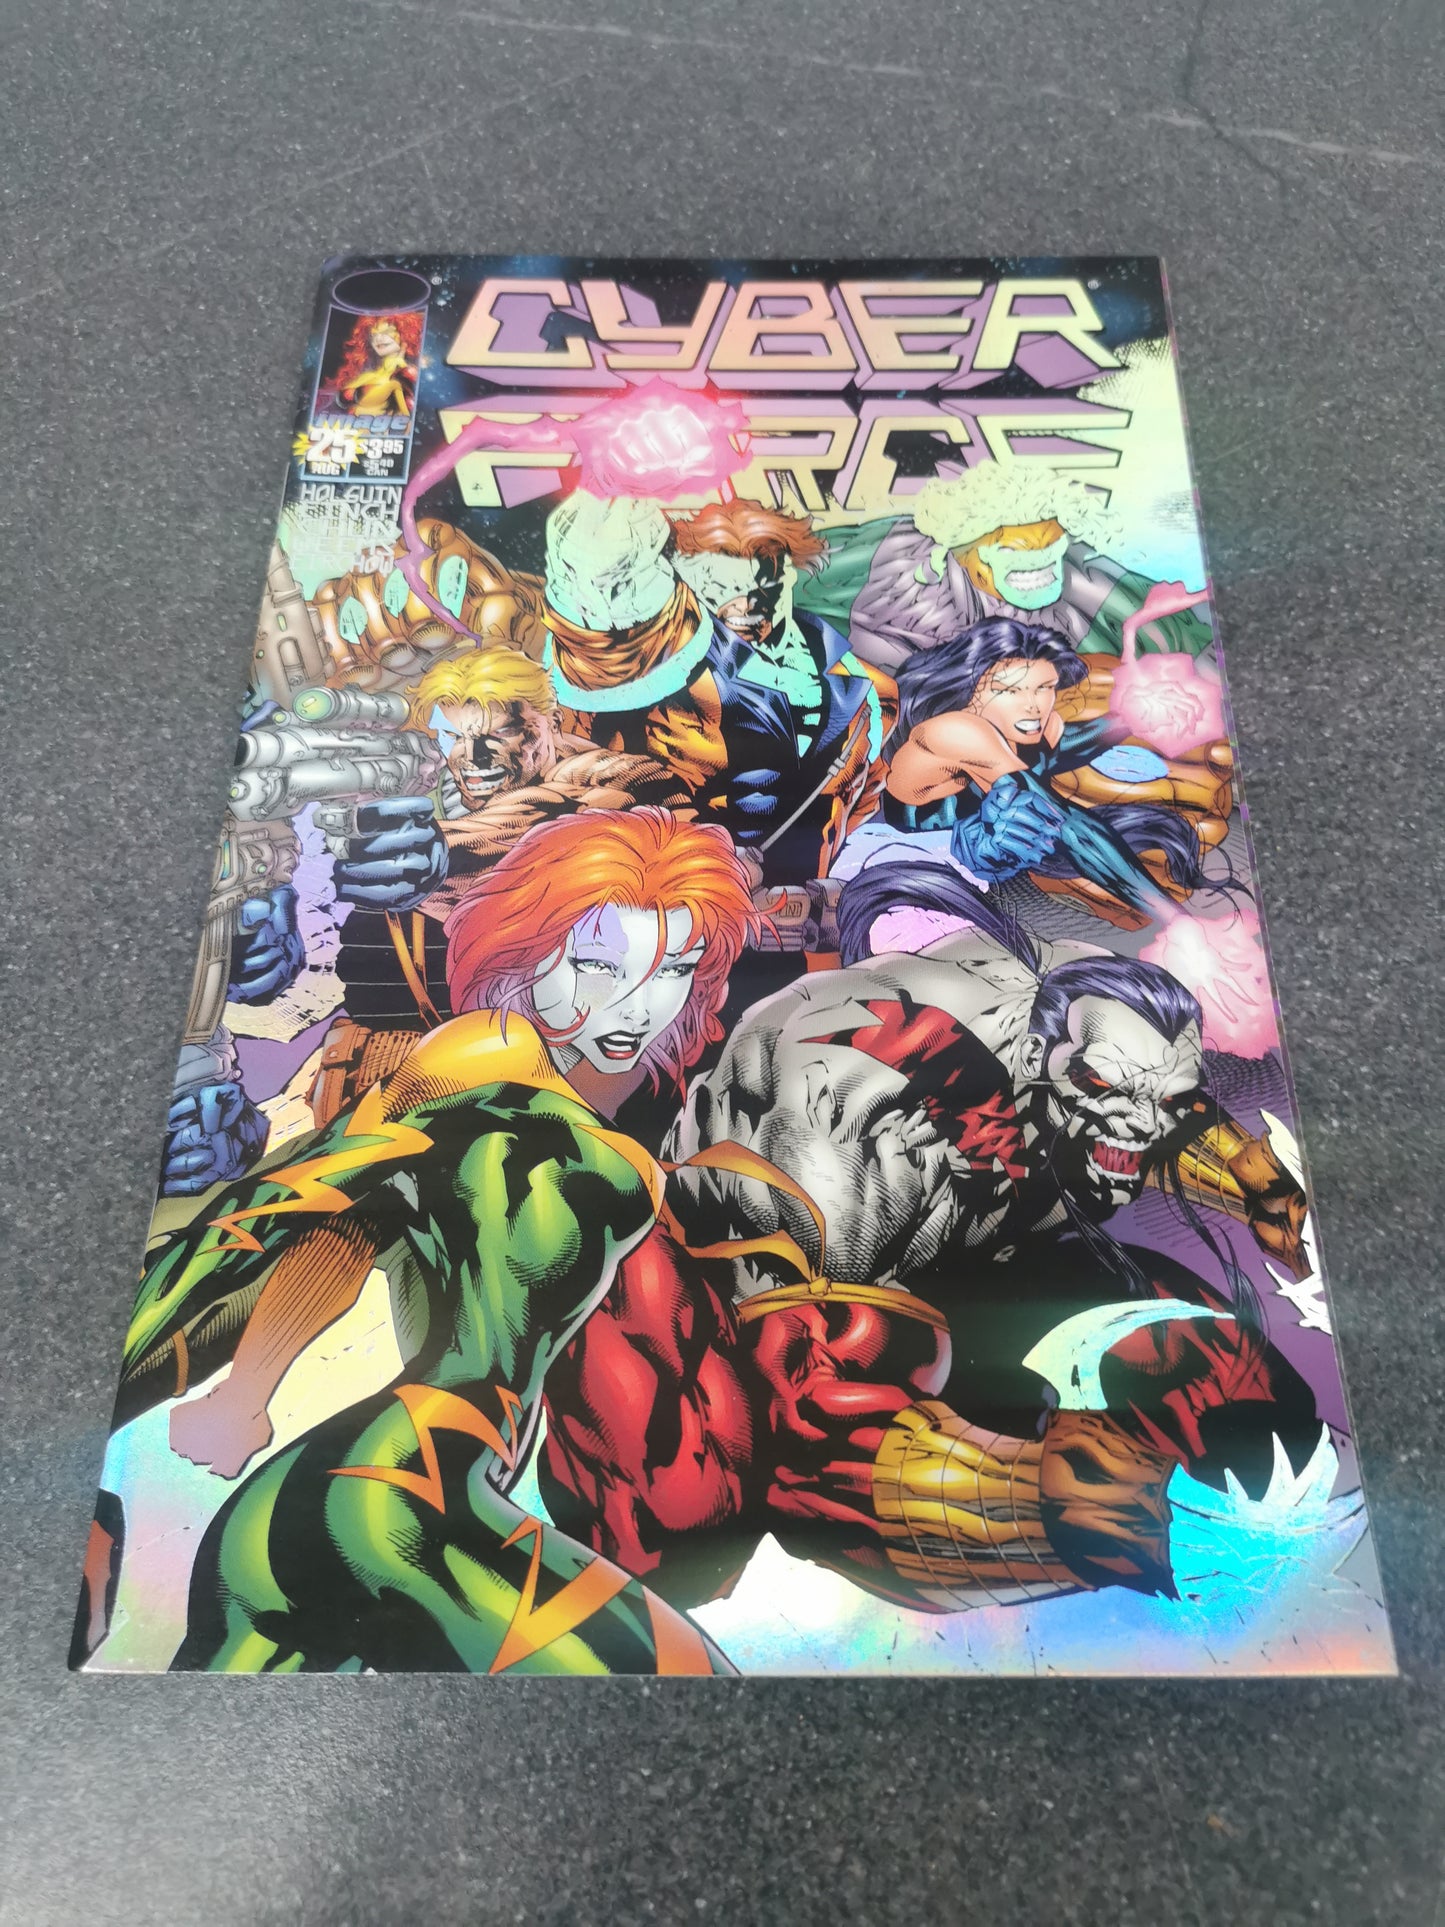 Cyber Force #25 1996 Foil Cover